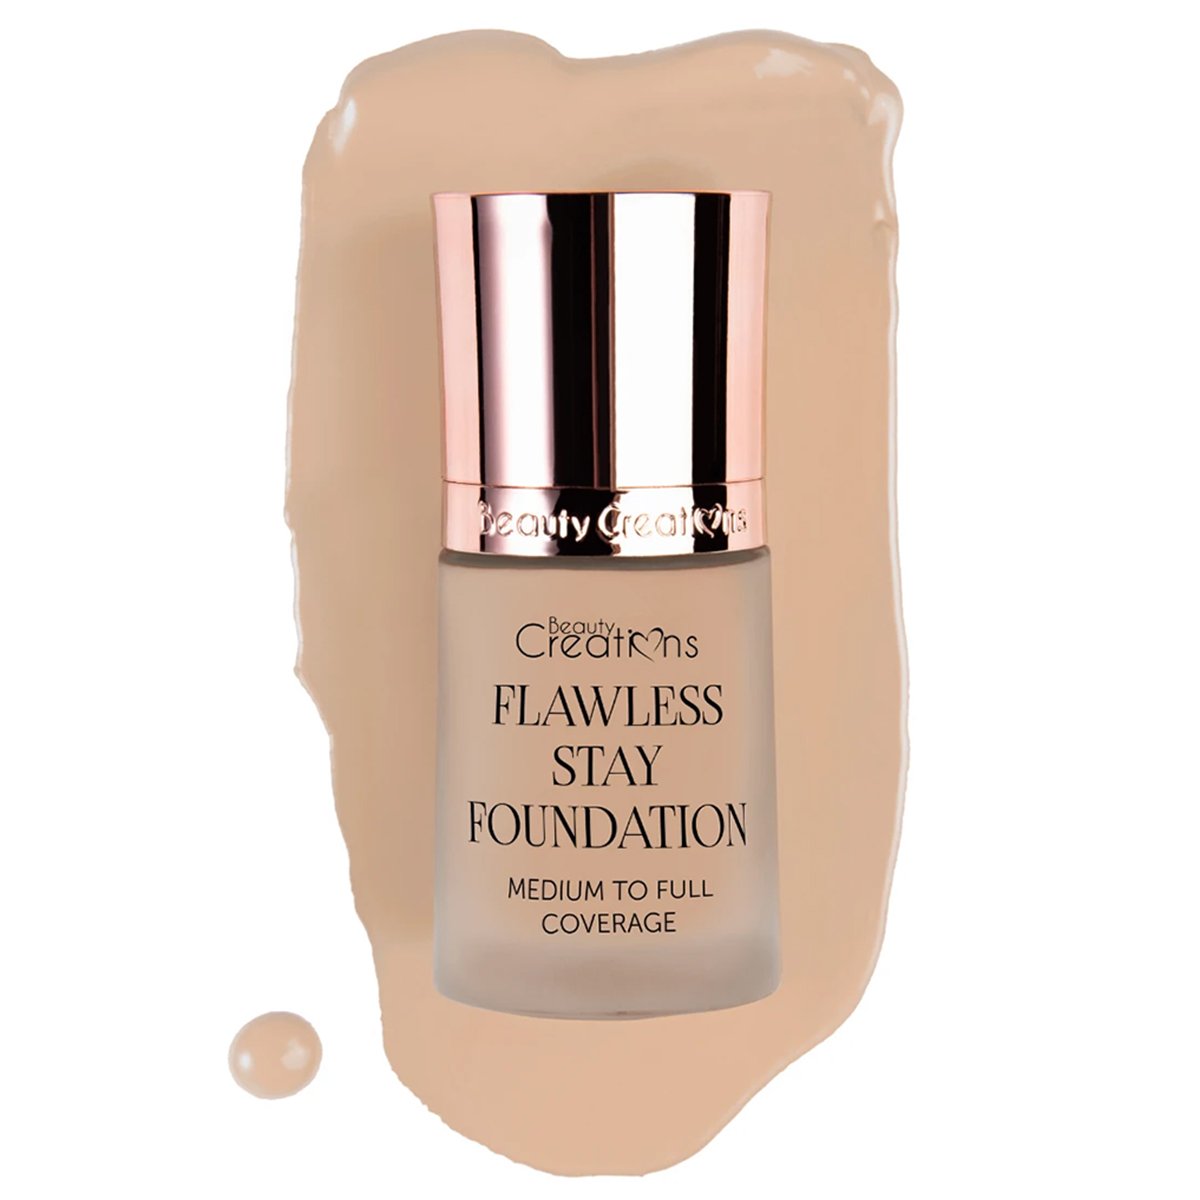 FLAWLESS STAY FOUNDATION 3.5 - BEAUTY CREATIONS